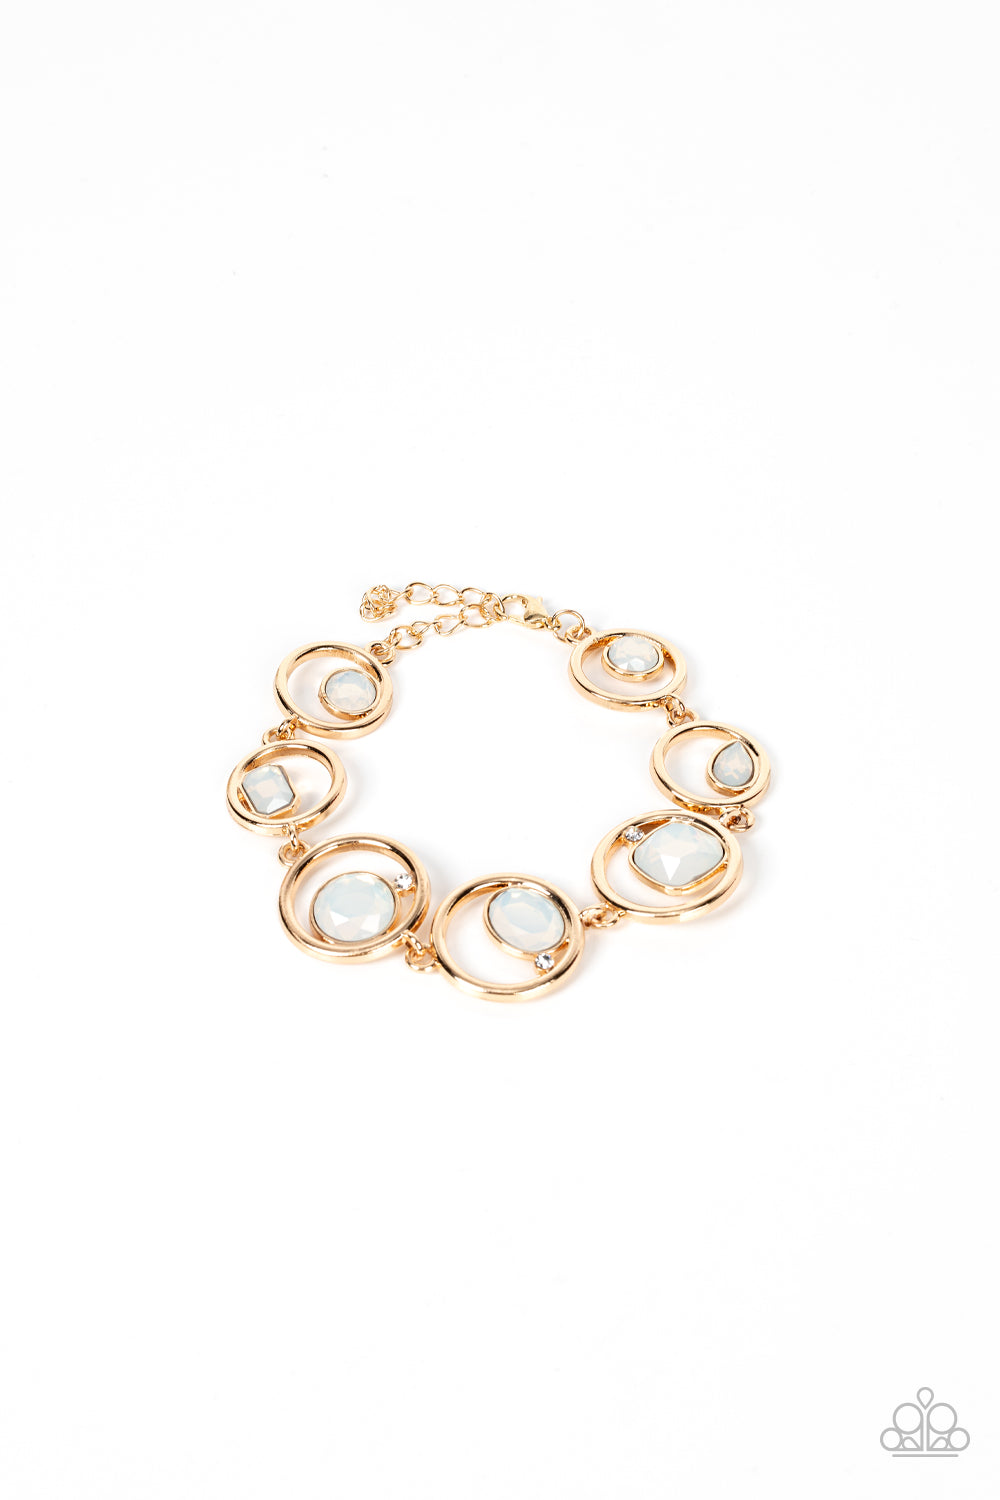 Paparazzi Date Night Drama - Gold Bracelets a sporadically infused with dainty white rhinestones, a glittery collection of round, teardrop, and emerald cut opal rhinestones haphazardly adorn the centers of interlocking gold hoops around the wrist for a mesmerizing finish. Features an adjustable clasp closure.  Sold as one individual bracelet.  Get The Complete Look! Necklace: "Big Night Out - Gold" (Sold Separately)